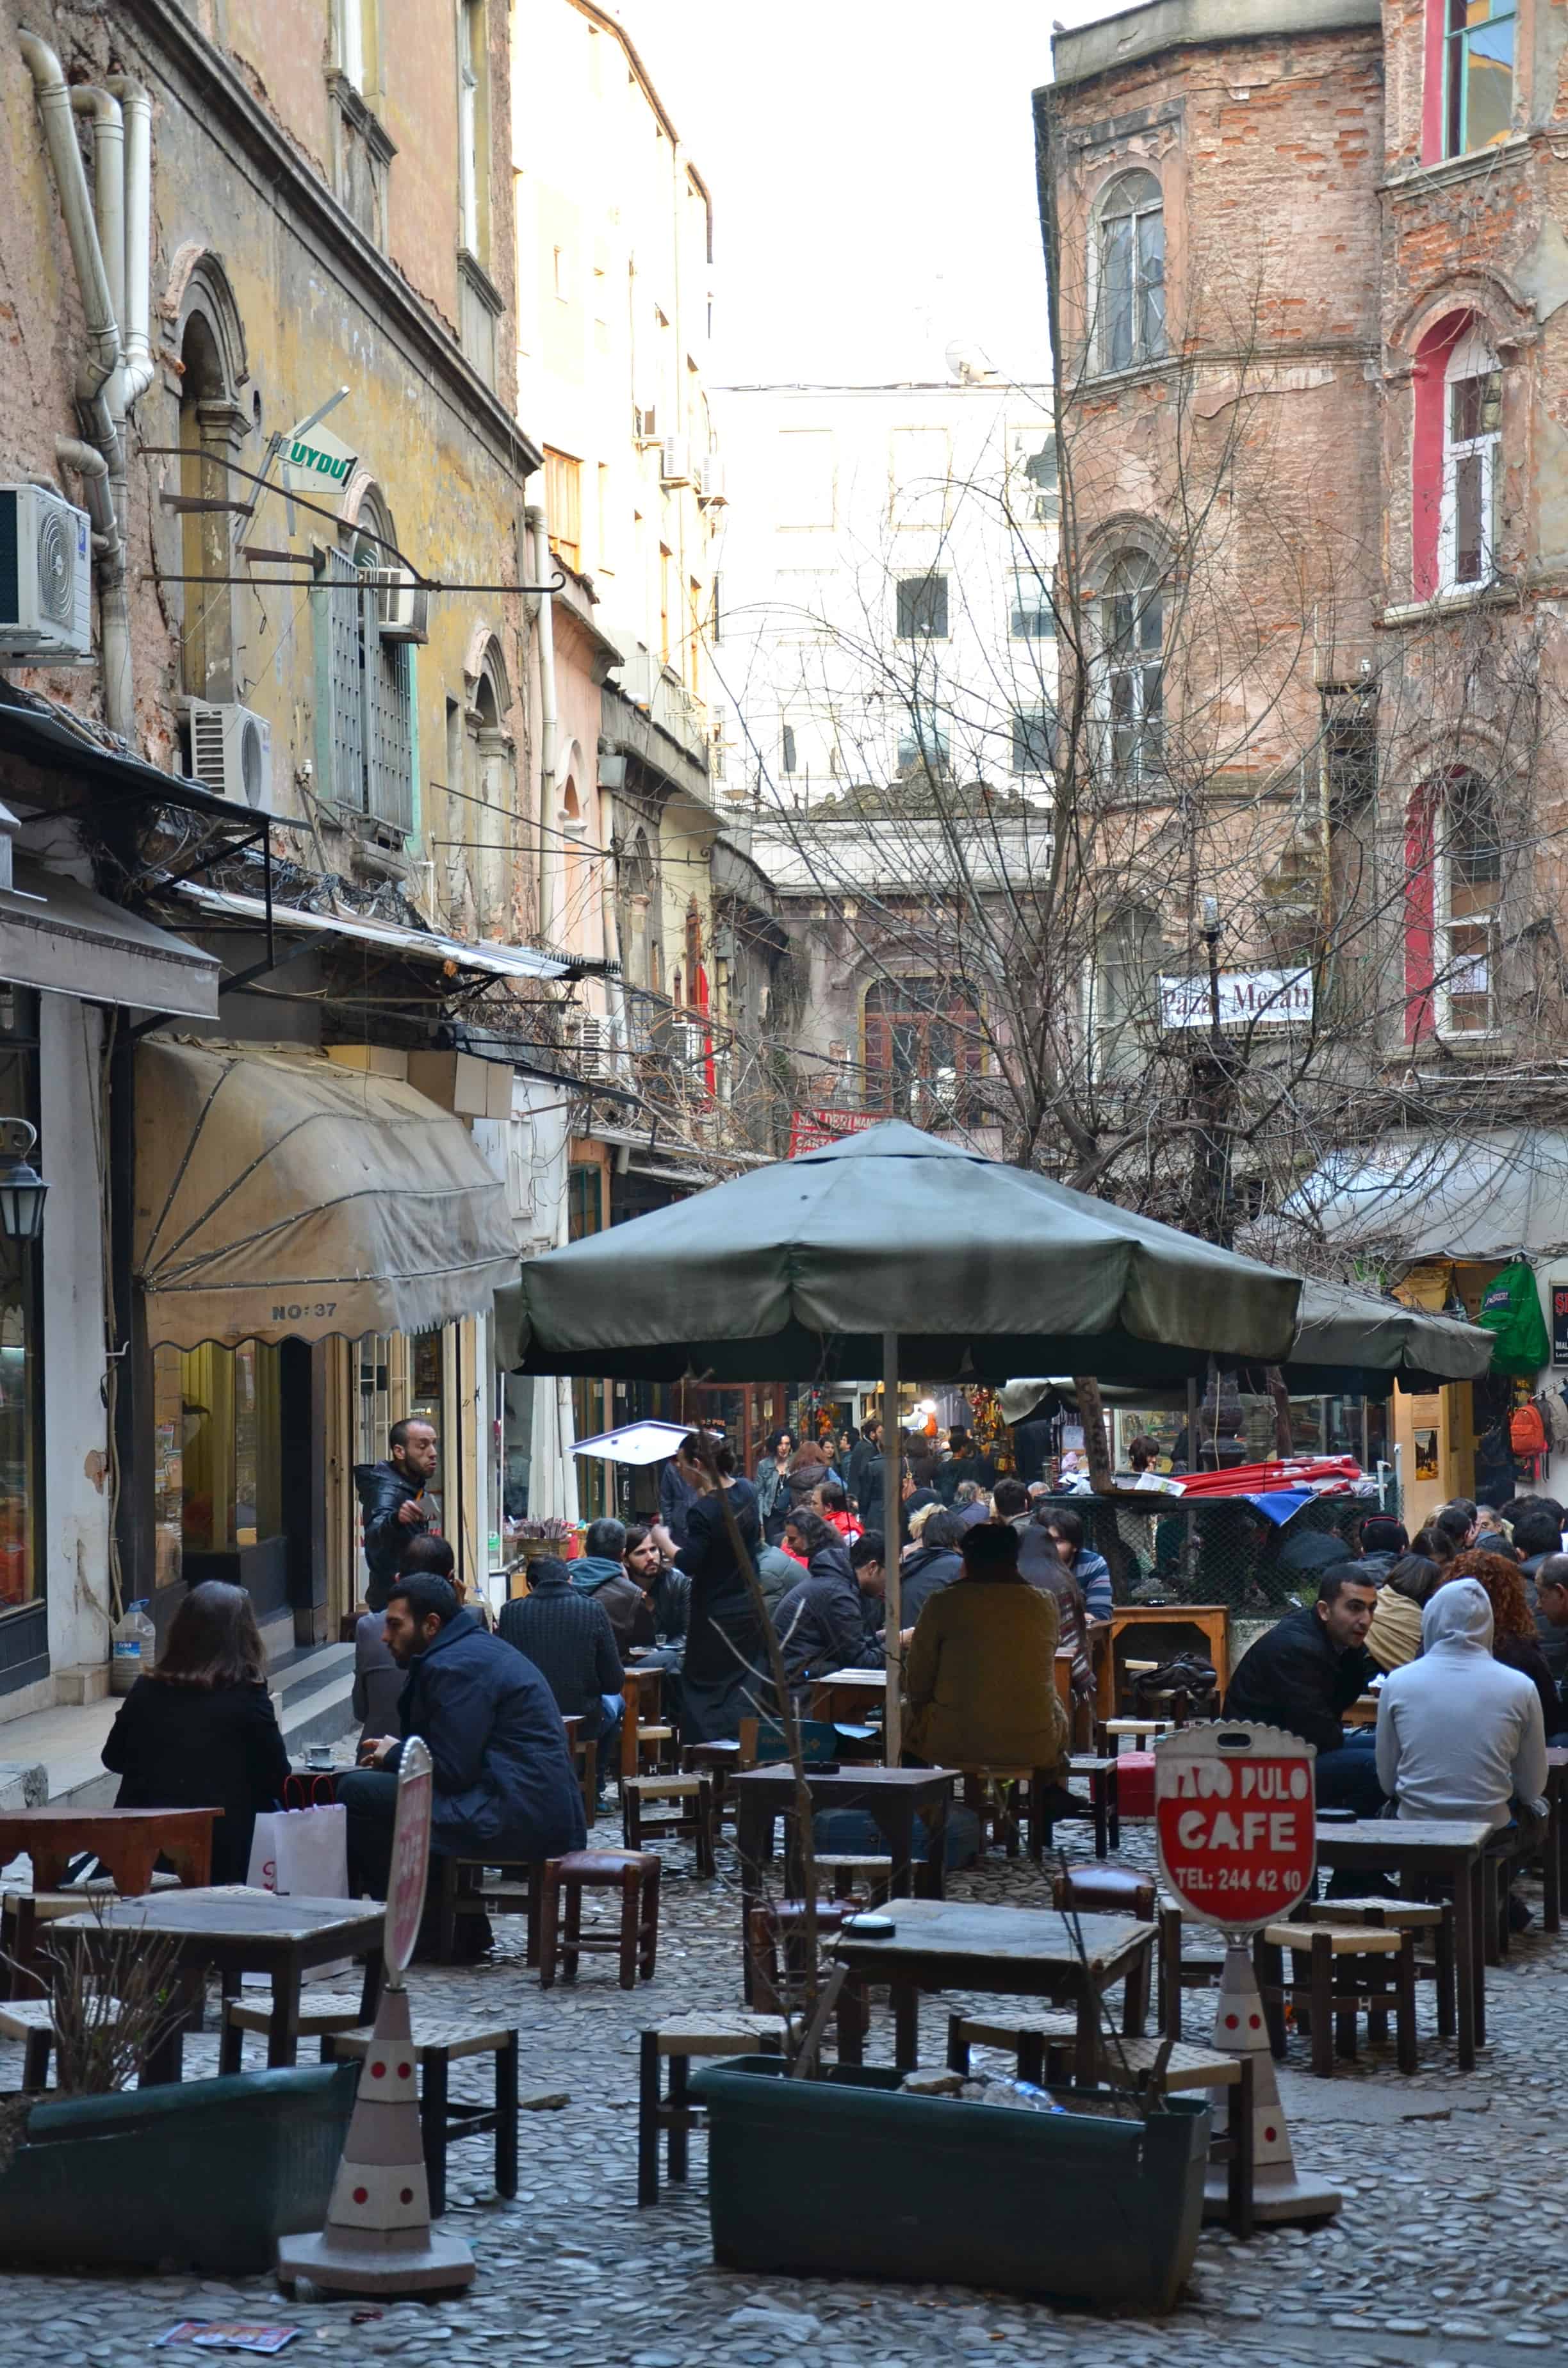 Hazzopulo Passage in March 2012 on Istiklal Street in Istanbul, Turkey